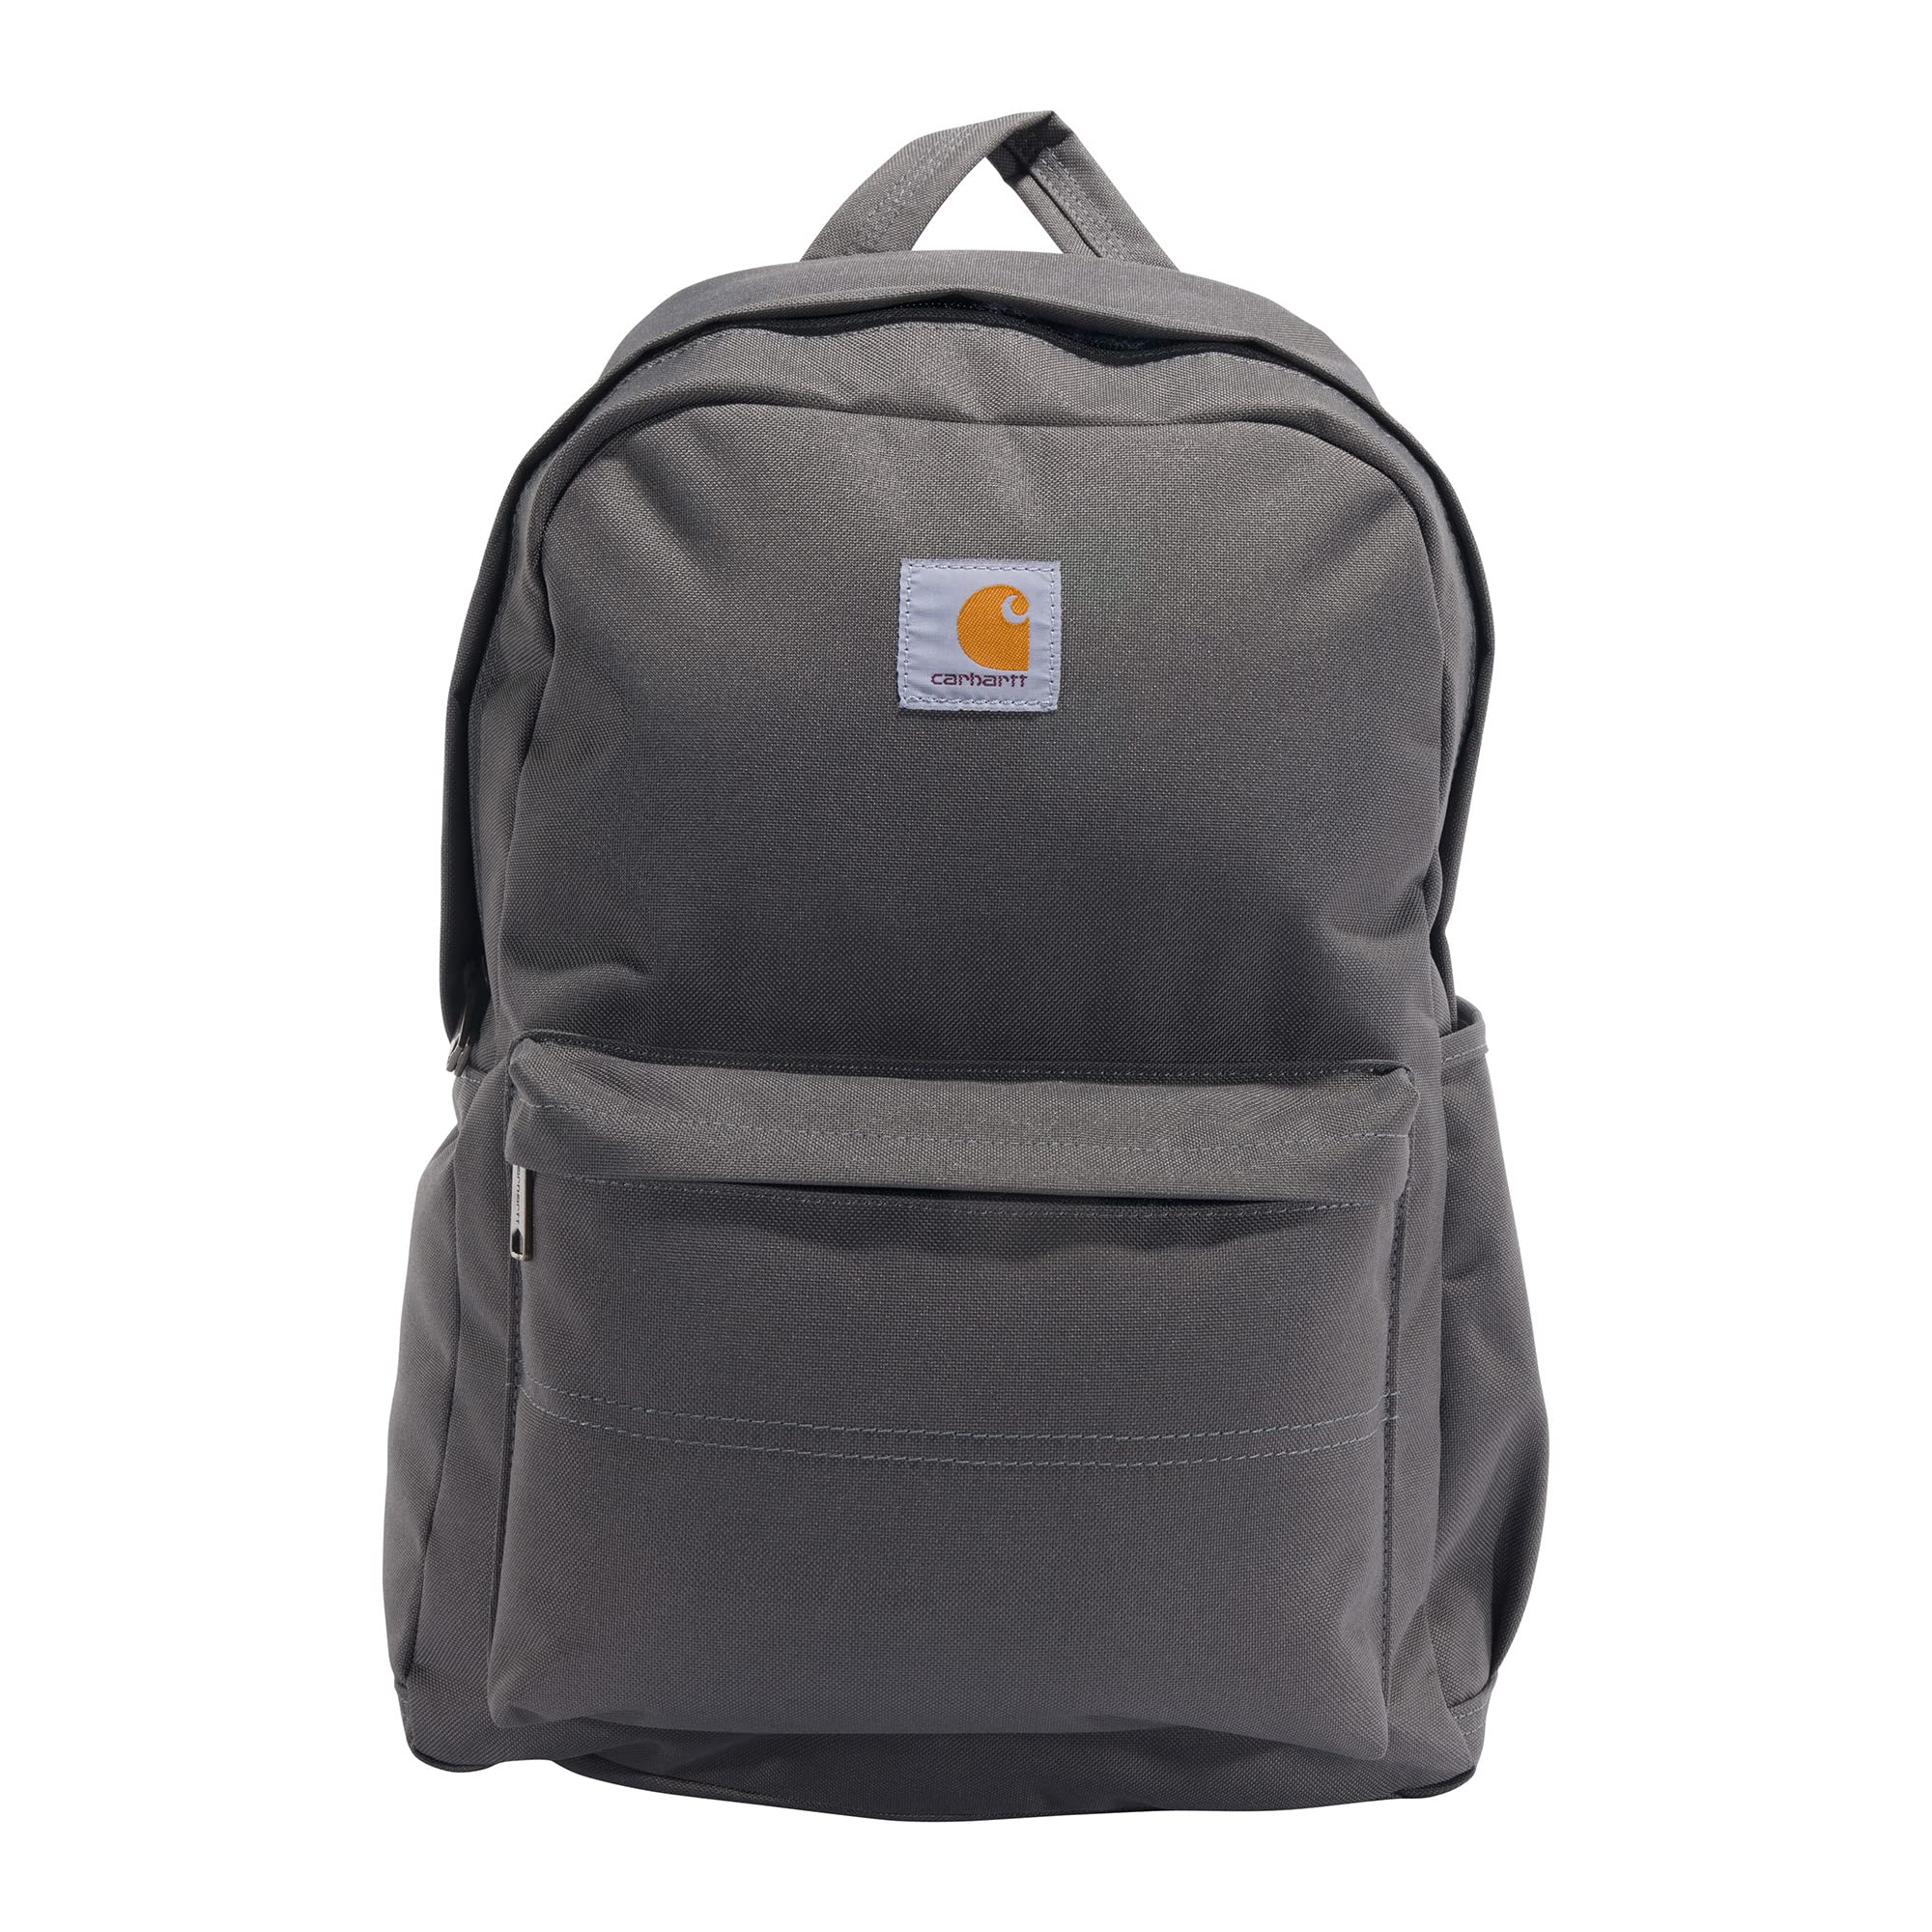 Carhartt 21L Classic Laptop Daypack, Durable Water-Resistant Pack with Laptop Sleeve, Gray